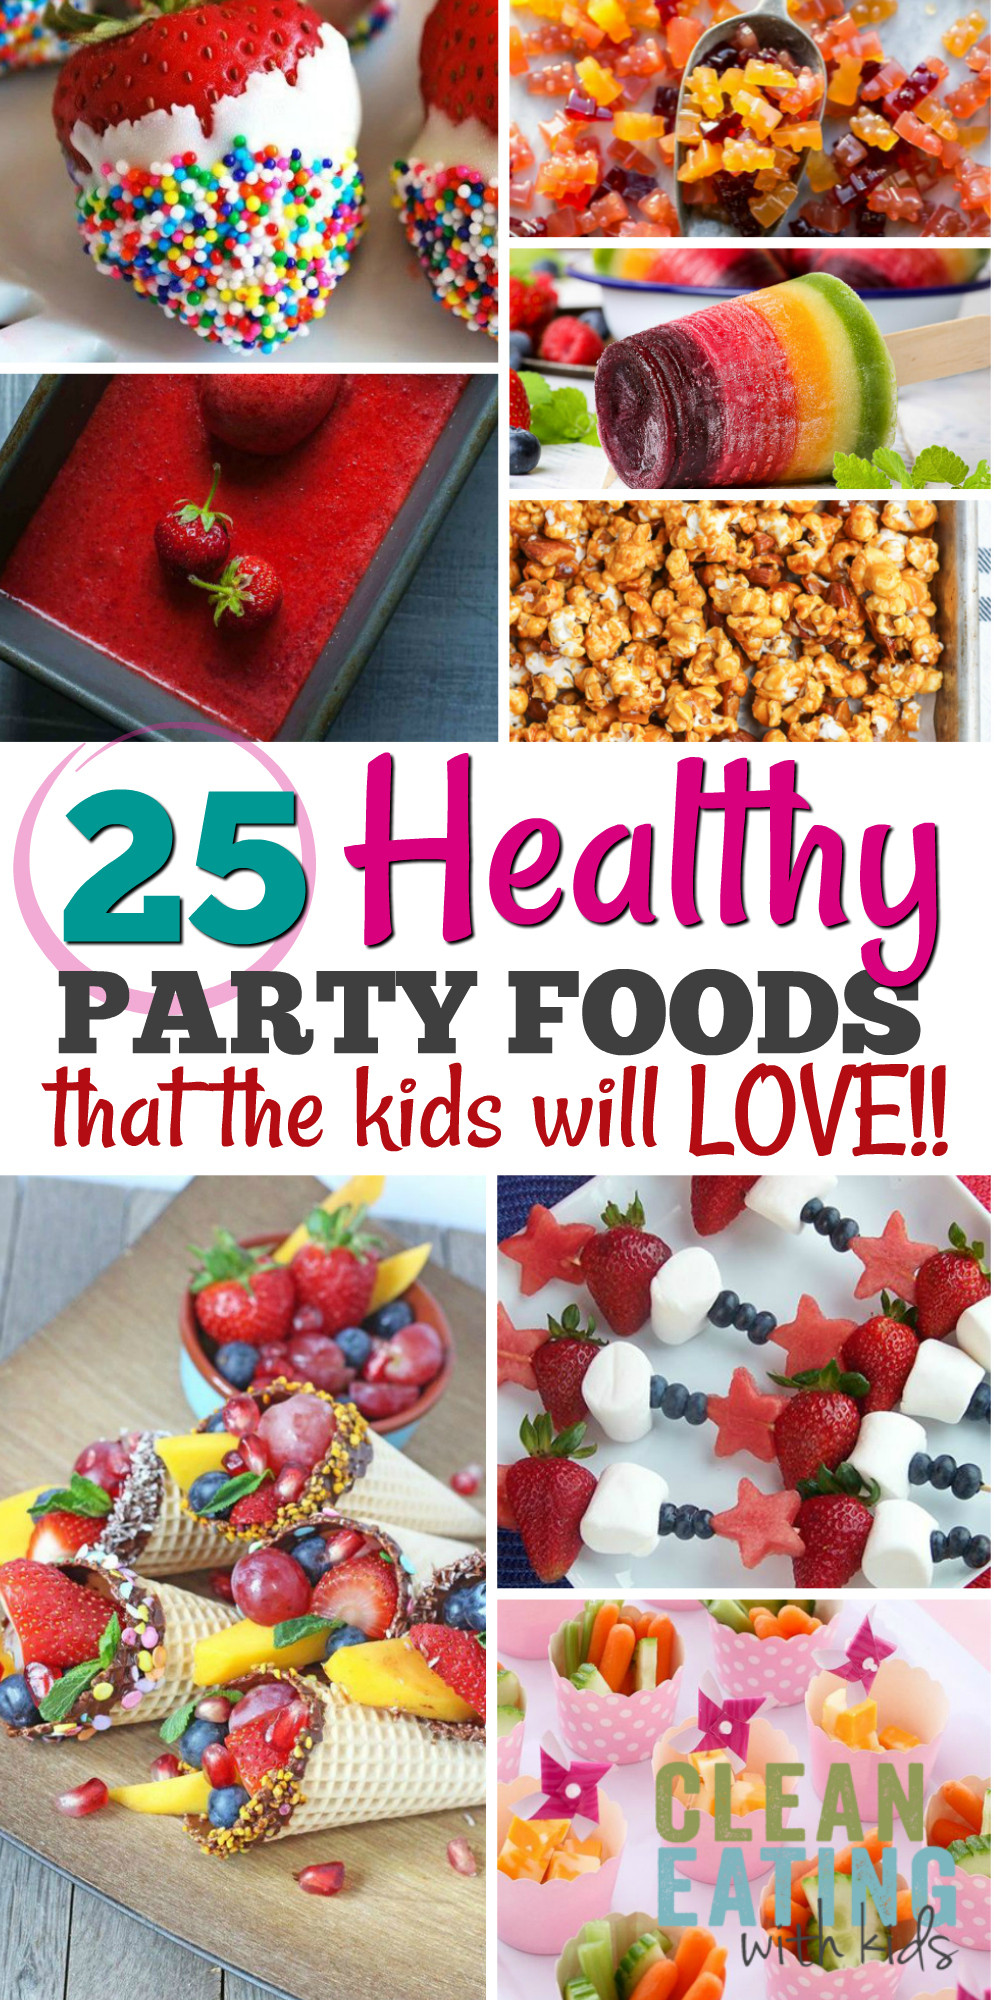 Party Ideas For Kids
 25 Healthy Birthday Party Food Ideas Clean Eating with kids